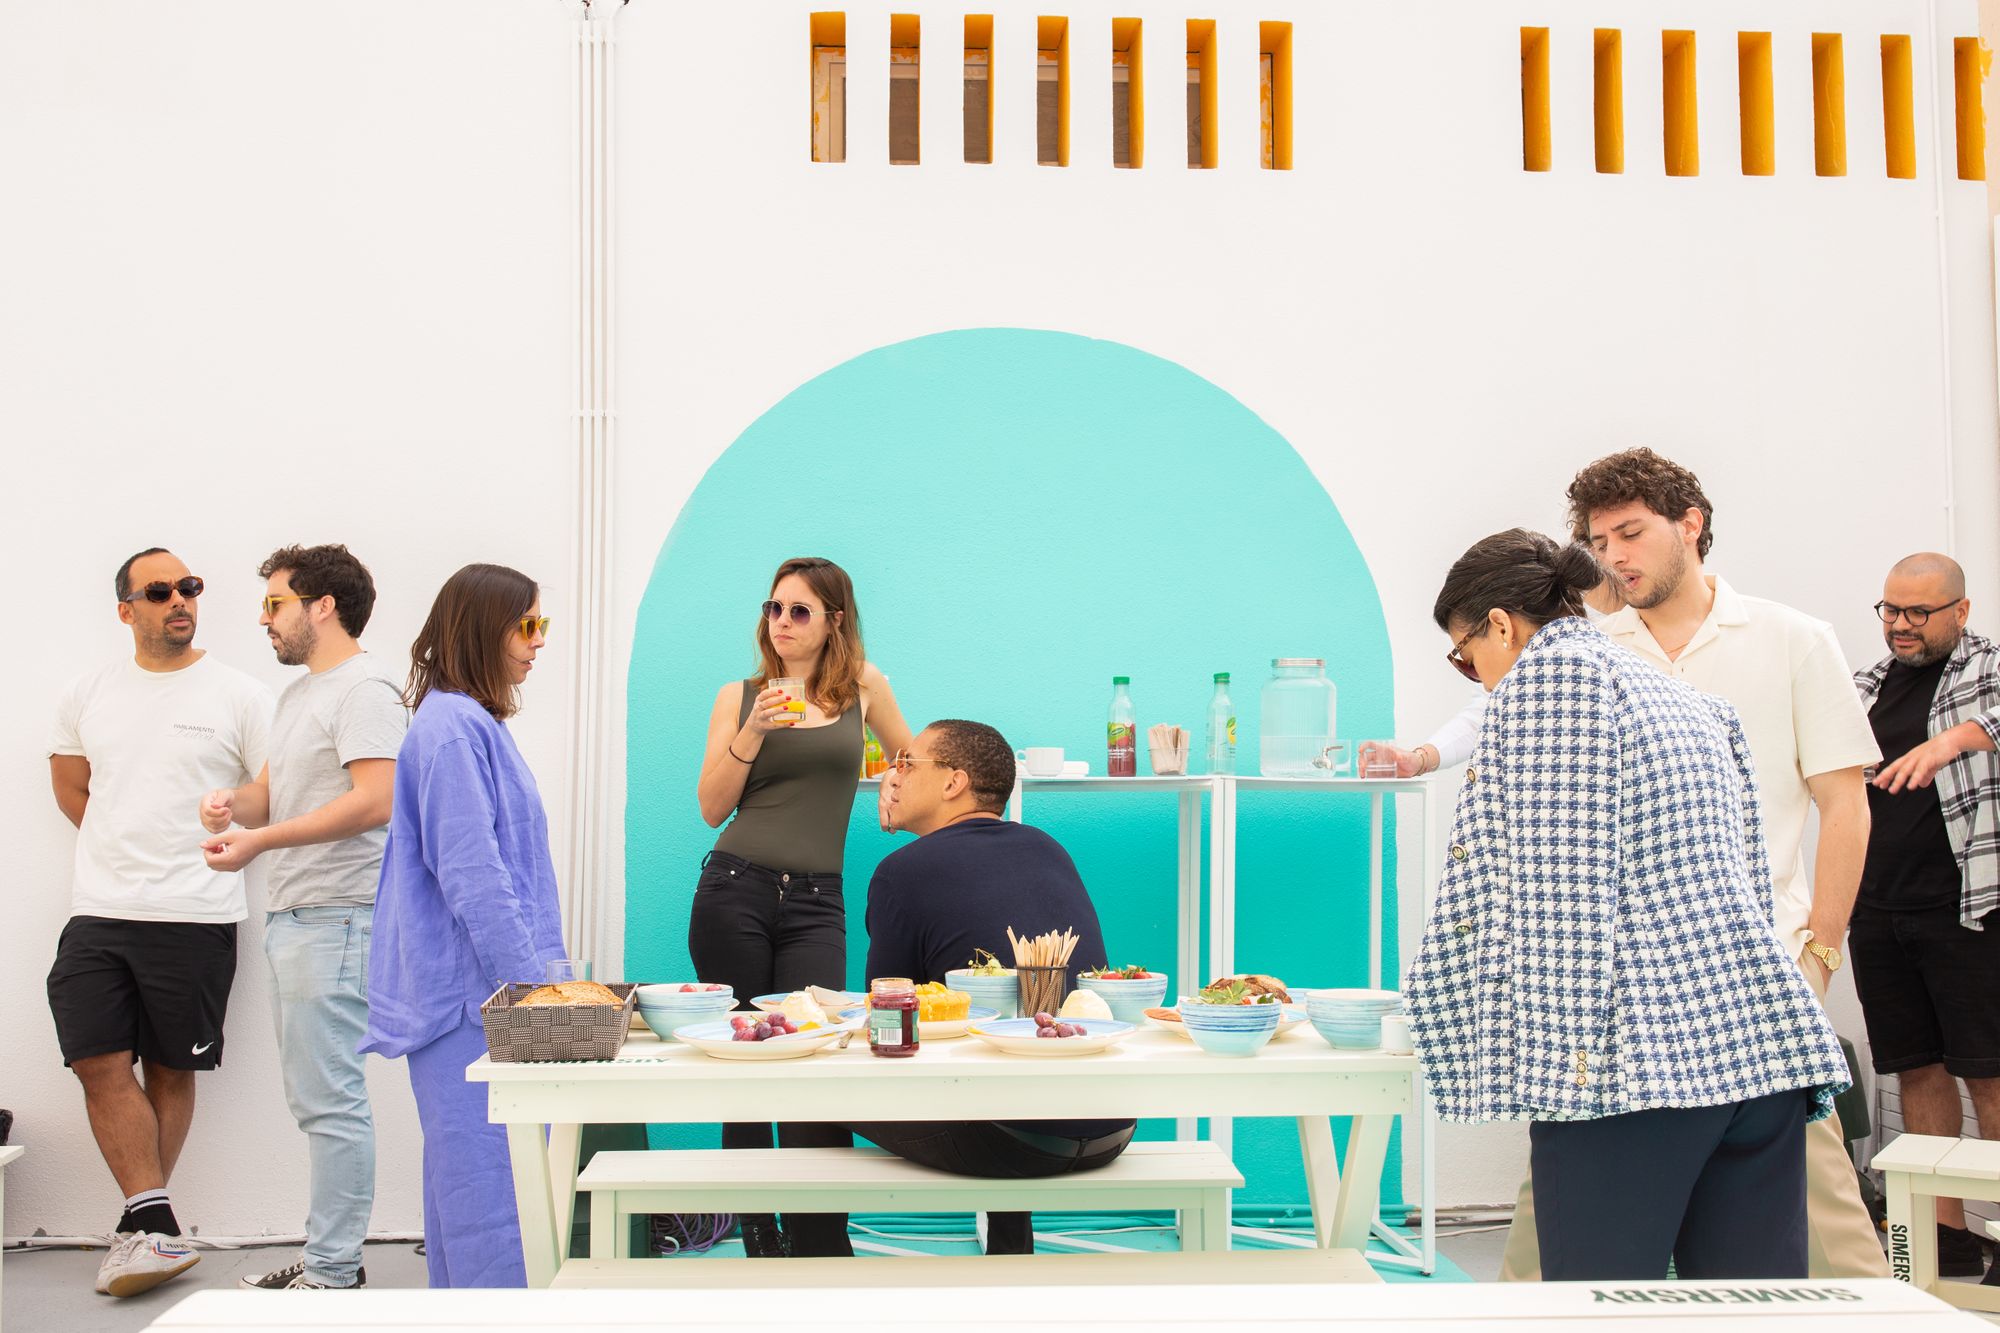 The first NFT Gallery in Lisbon just opened - and it's curated by Artpool